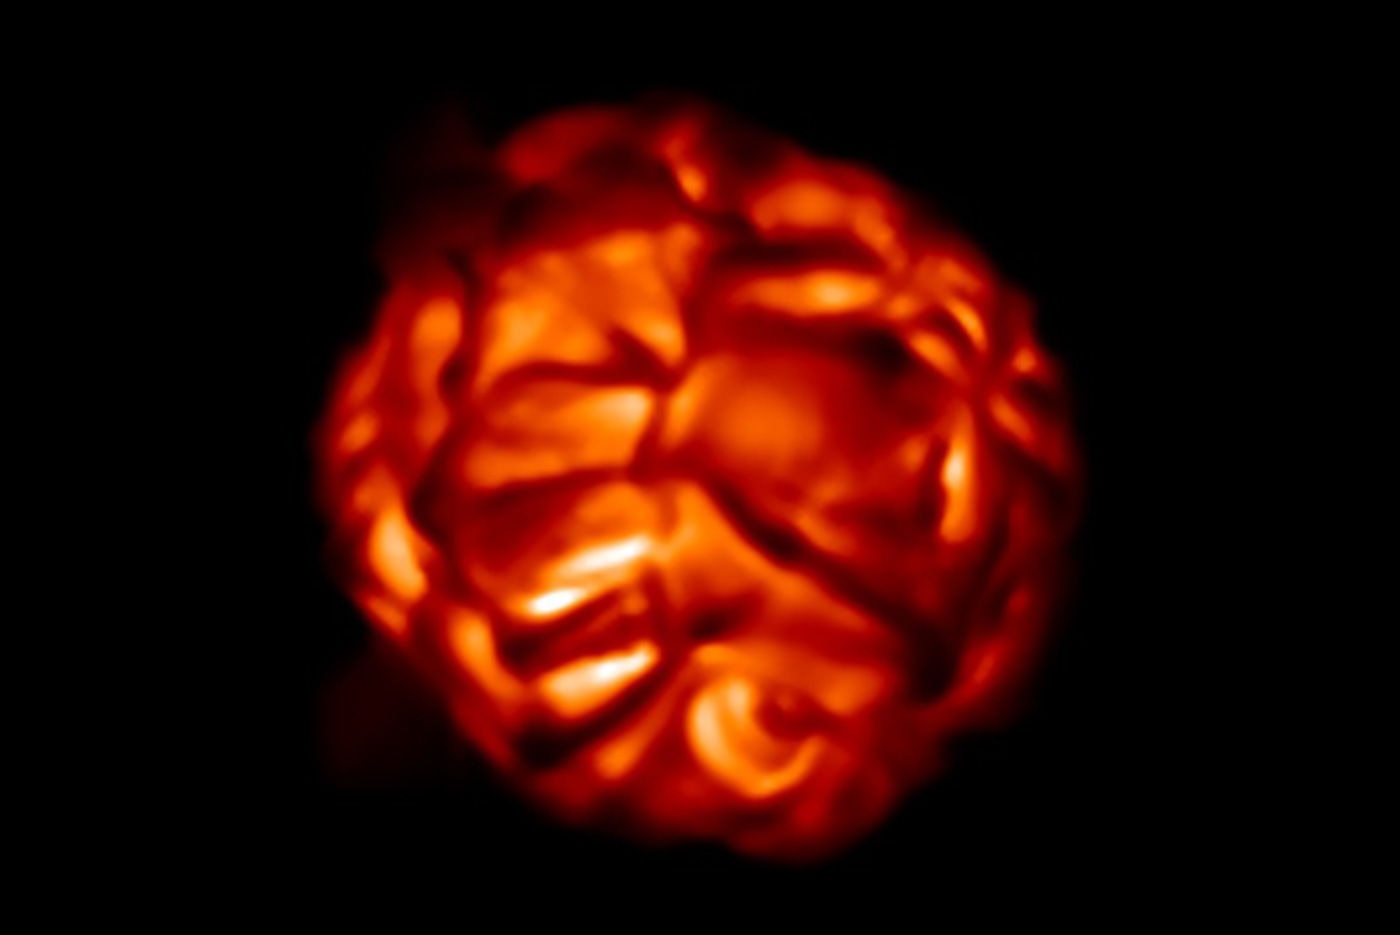 A simulation of the physical conditions inside Betelgeuse predict what the surface looks like, given hot gas rising, cooling, and falling back inside. Credit: Bernd Freytag